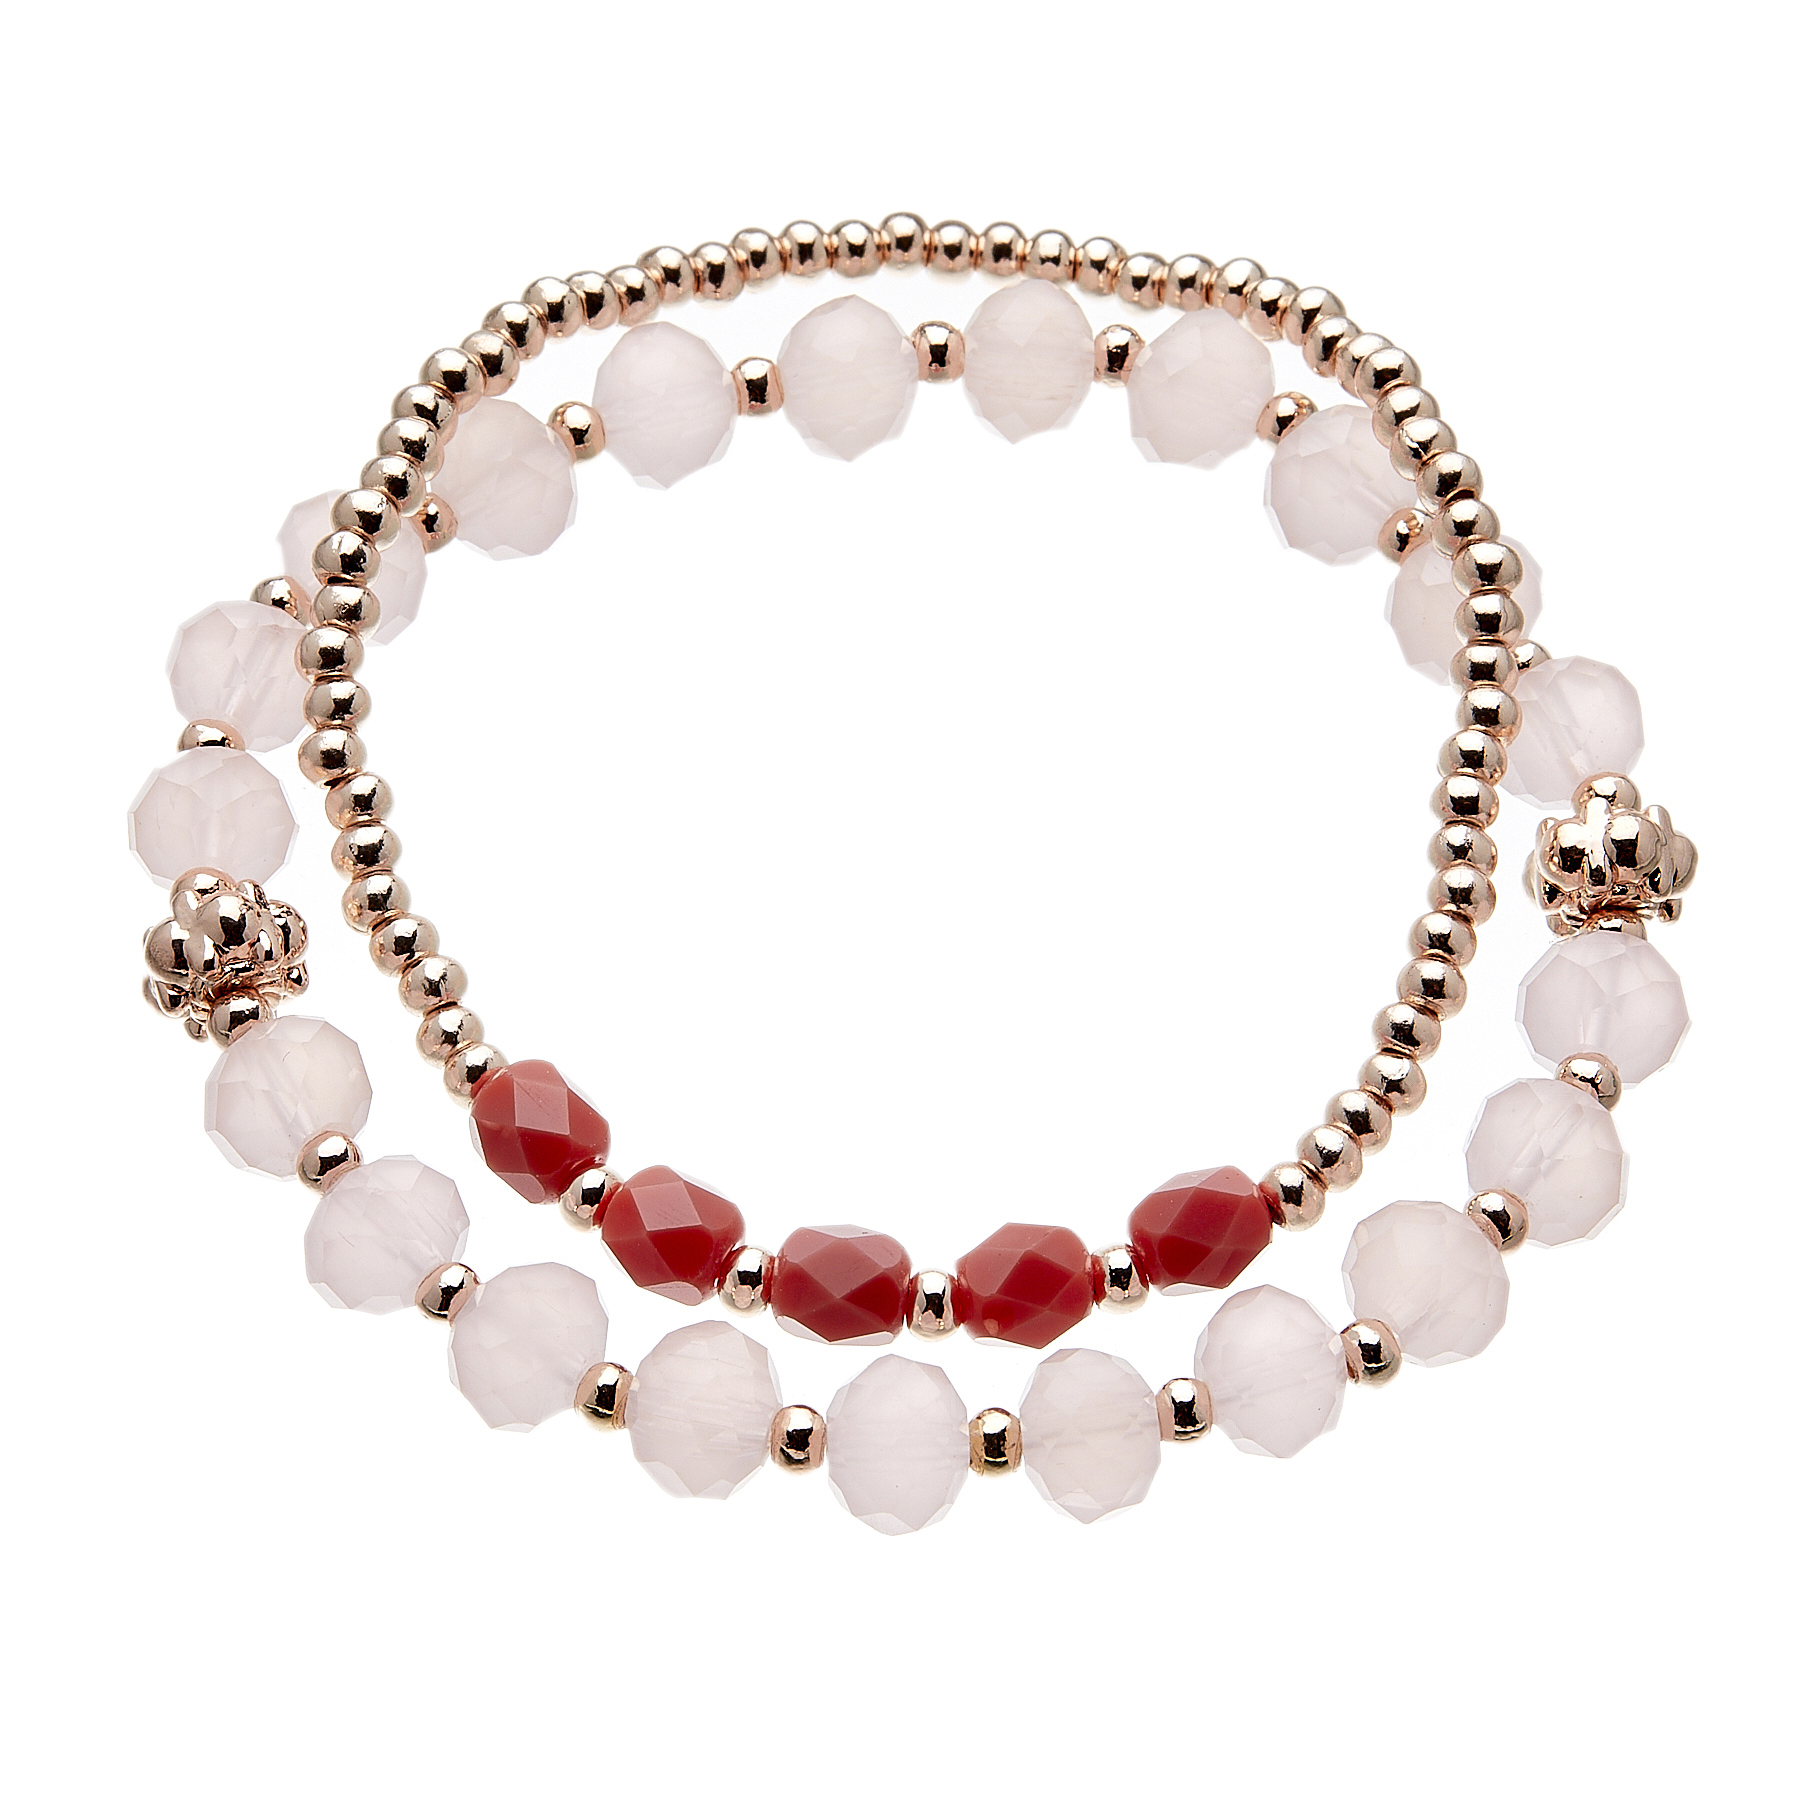 Set of two Bracelets with pink and champagne gold beads - Yori P33-32